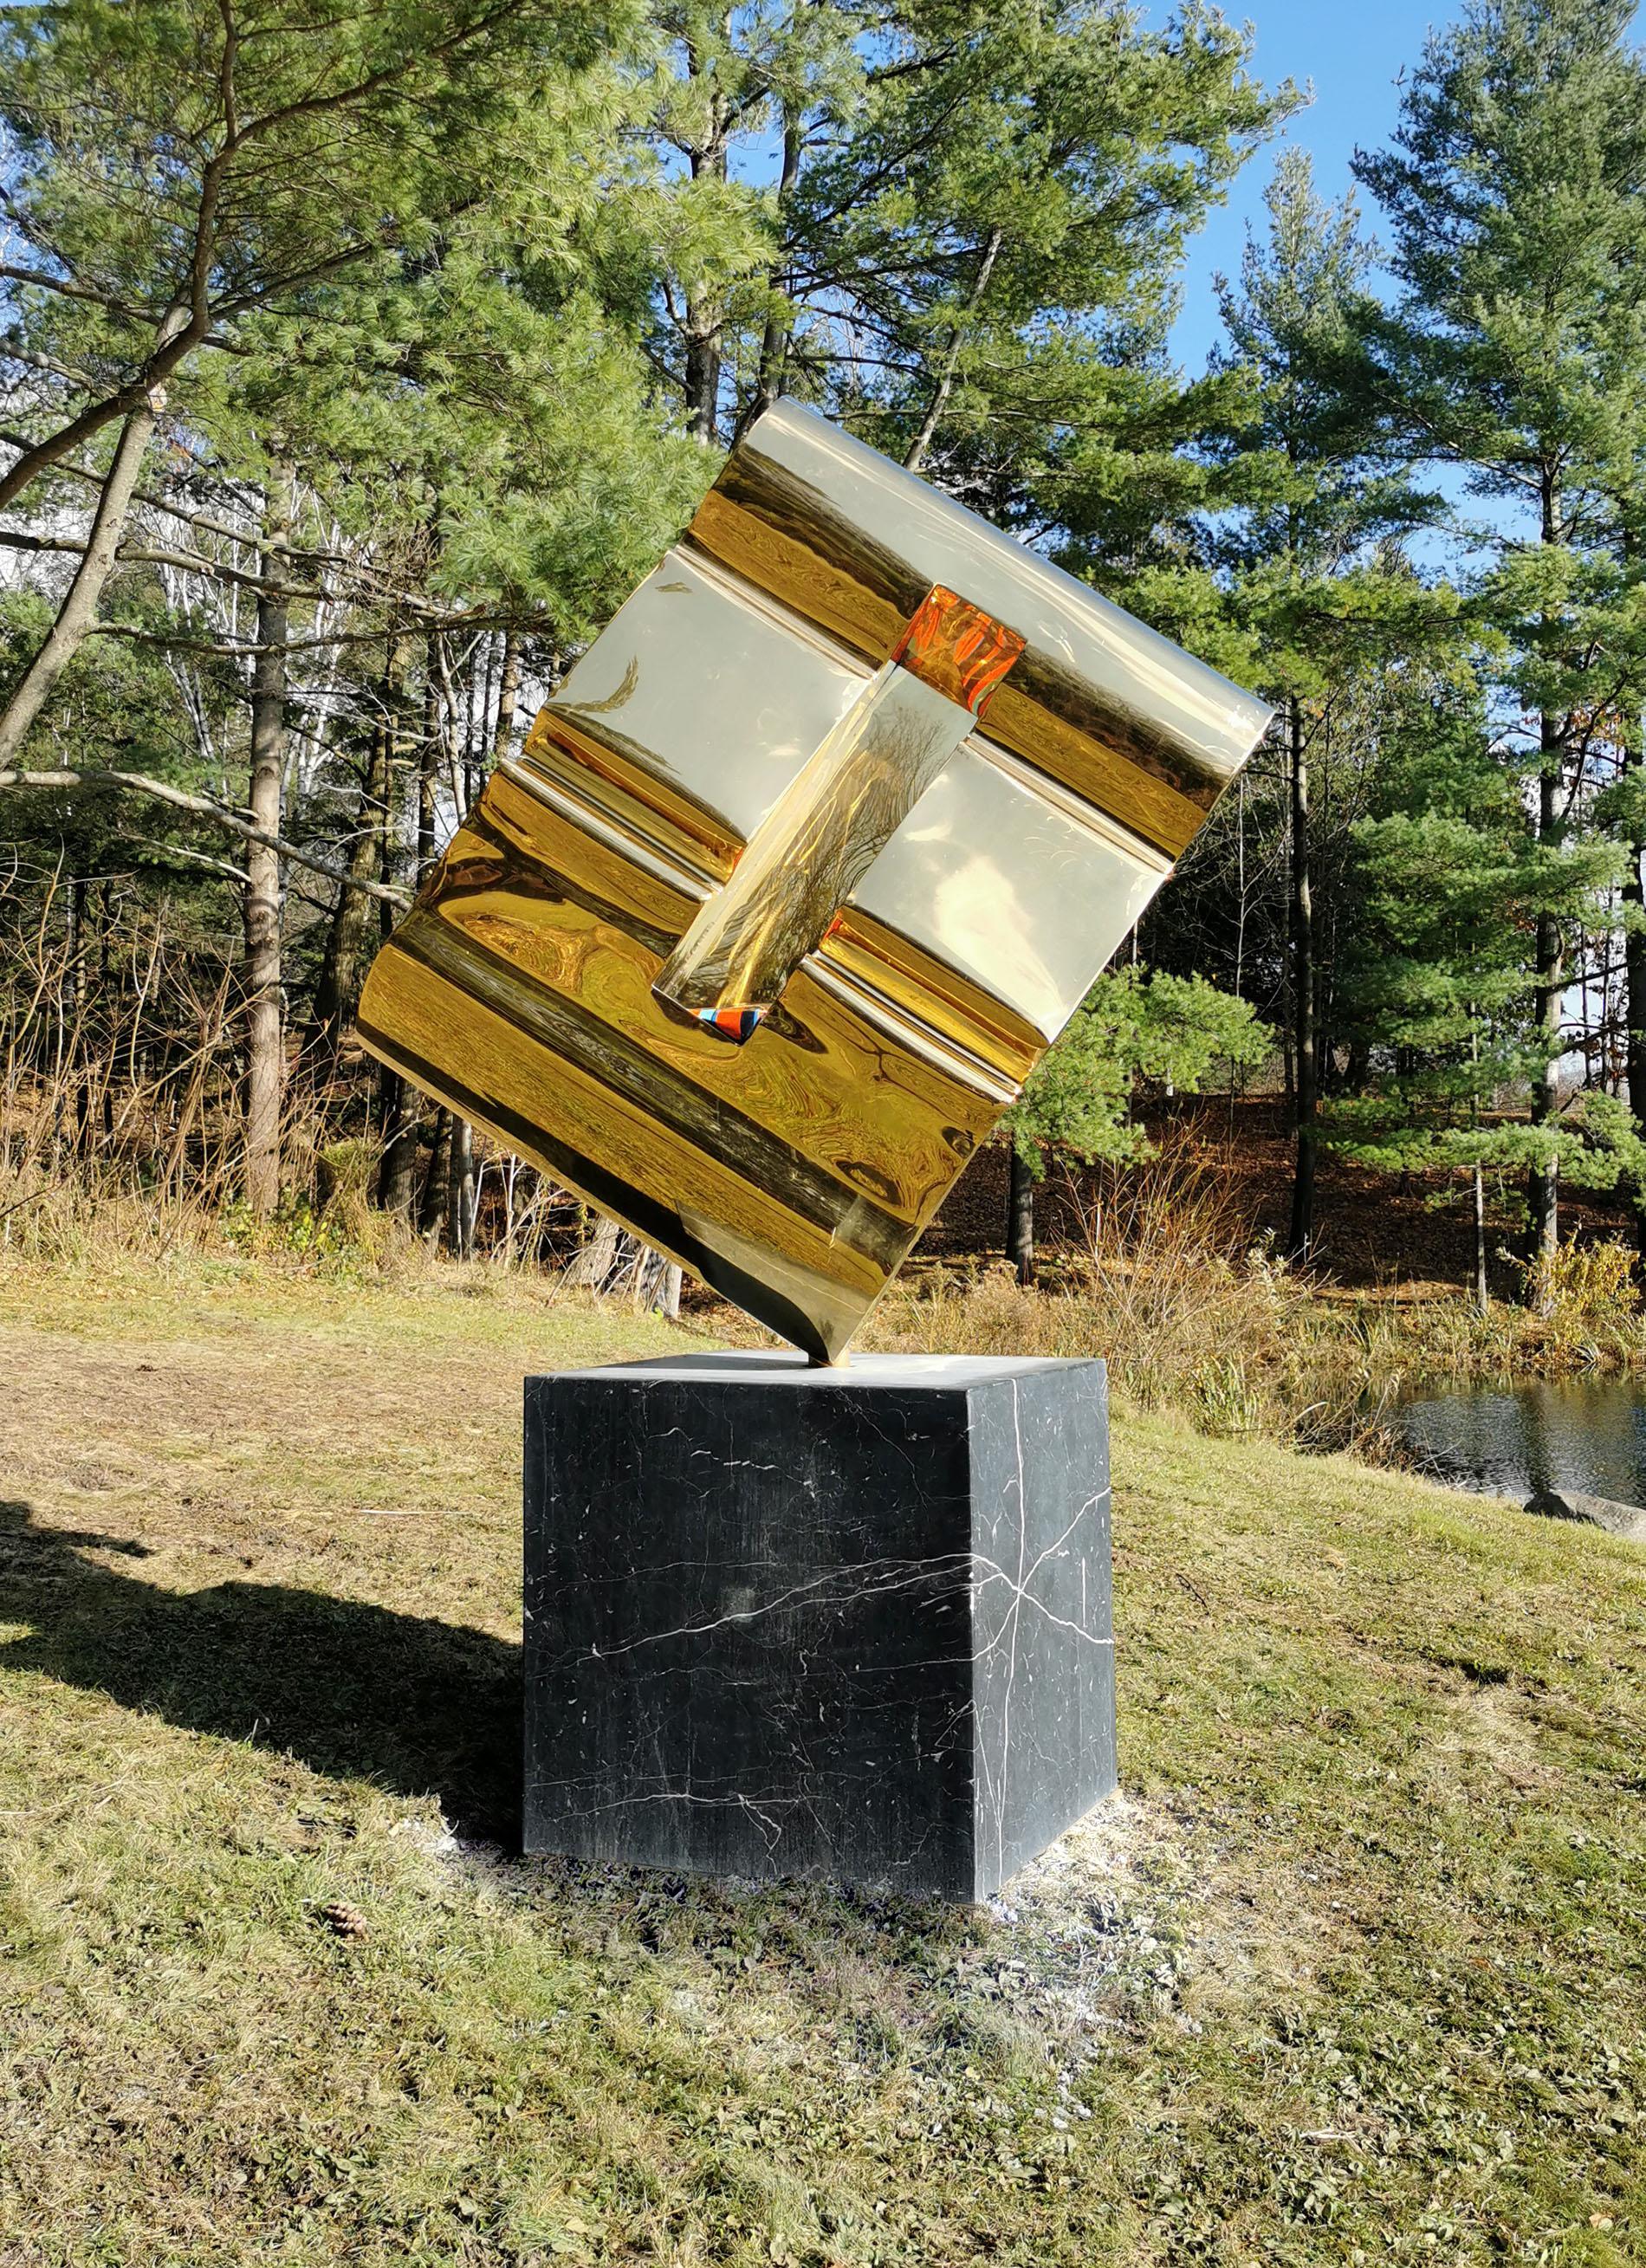 Inspired by the heavens, Canadian artist Viktor Mitic has created another captivating contemporary stainless-steel sculpture finished in 24 kt. gold. One of Mitic’s Constellation series, this enigmatic work owes its form to the abstract shape of